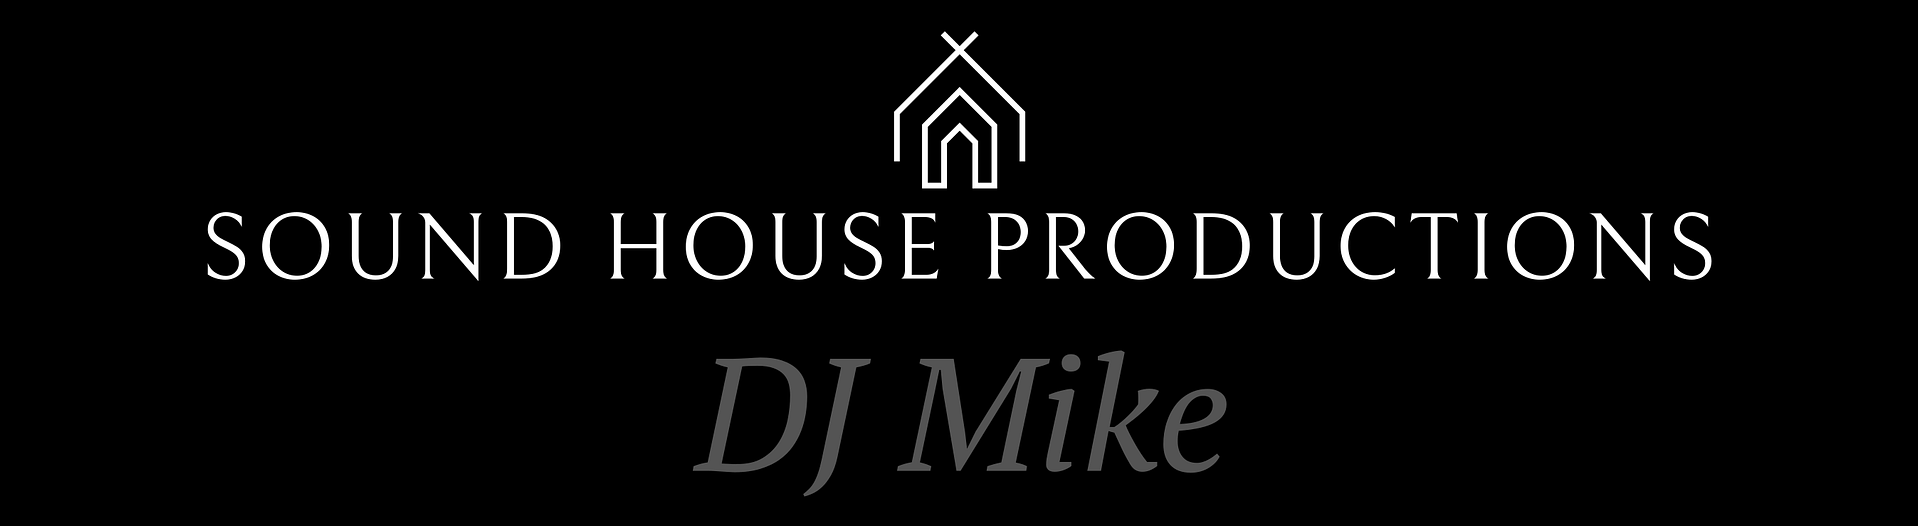 Sound House Productions